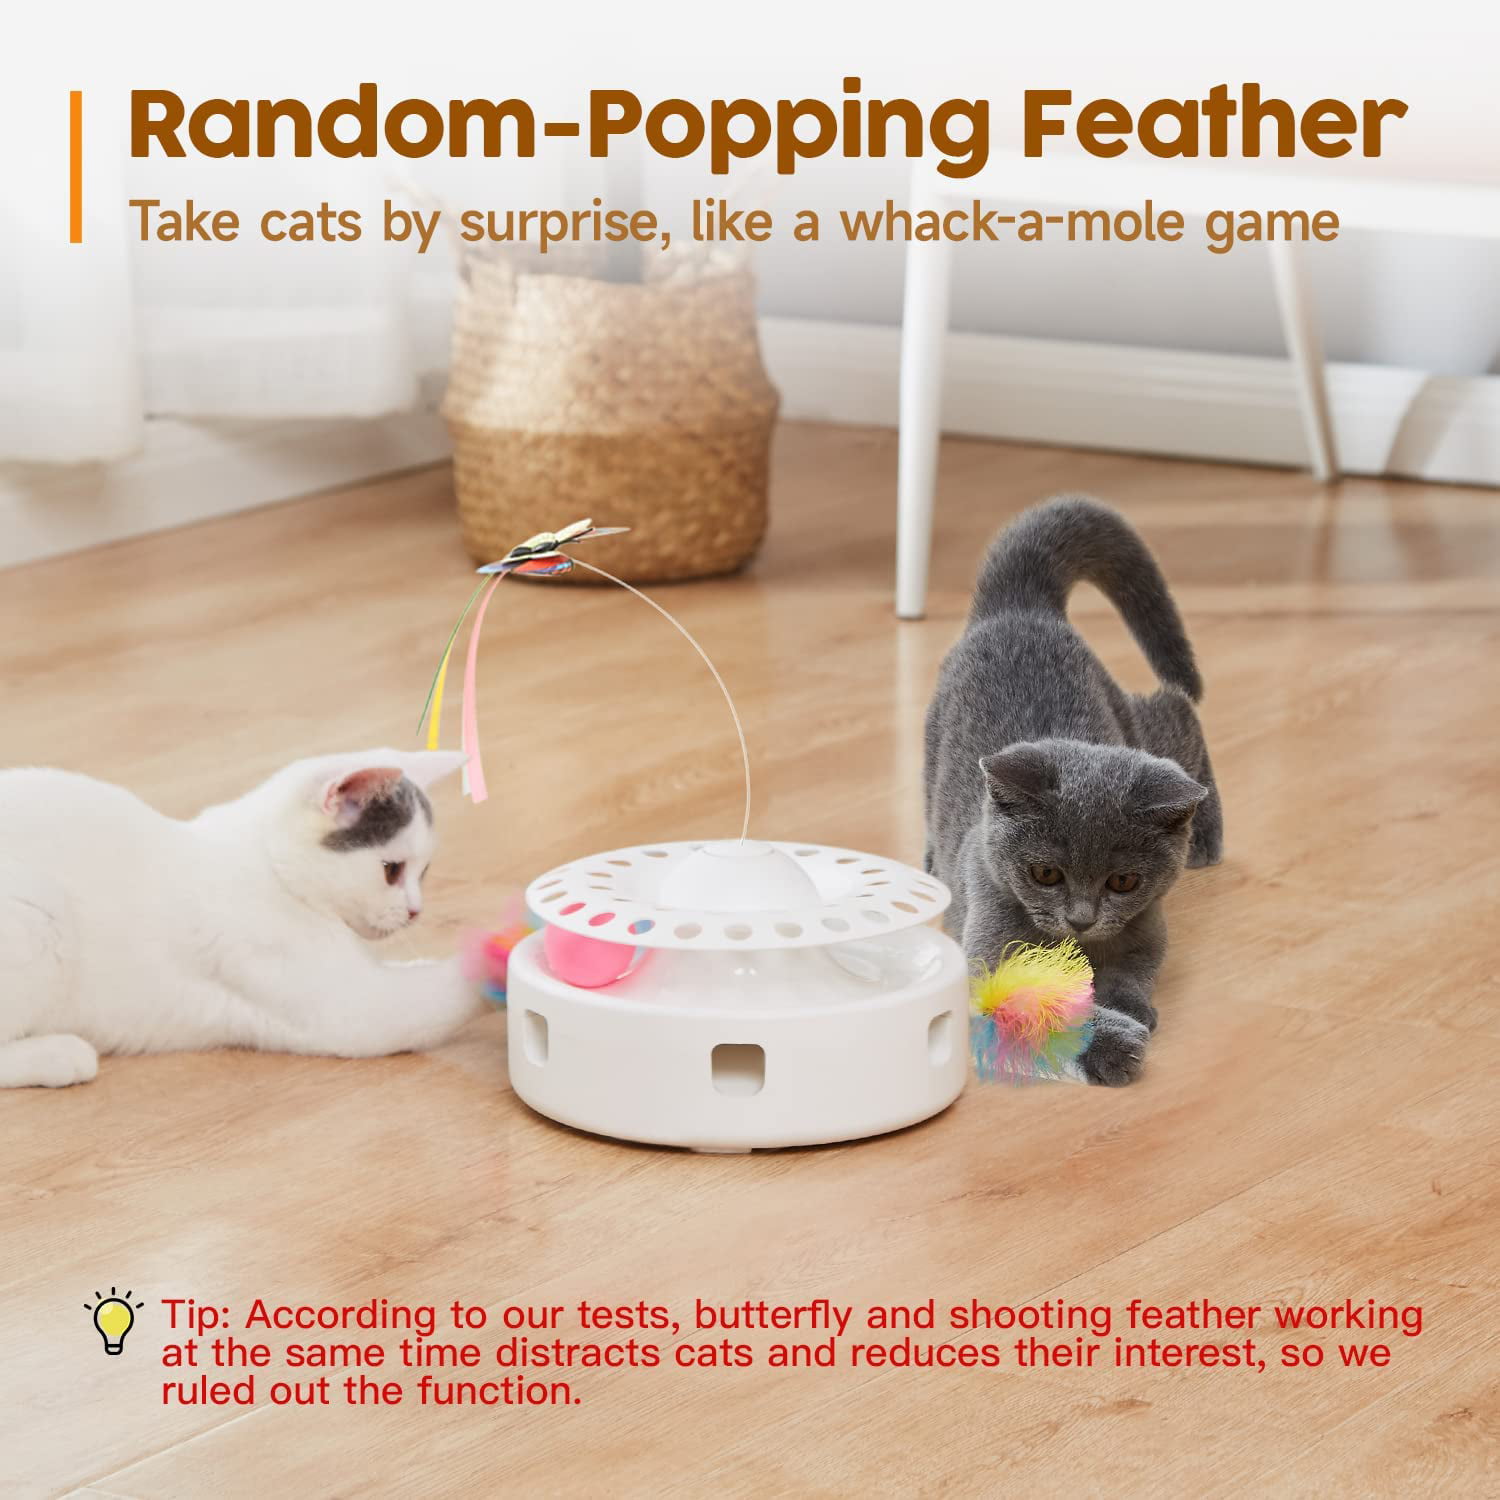 3-in-1 Interactive Cat Toys, Automatic Boredom Relief Kitten Toys 360°  Rotating